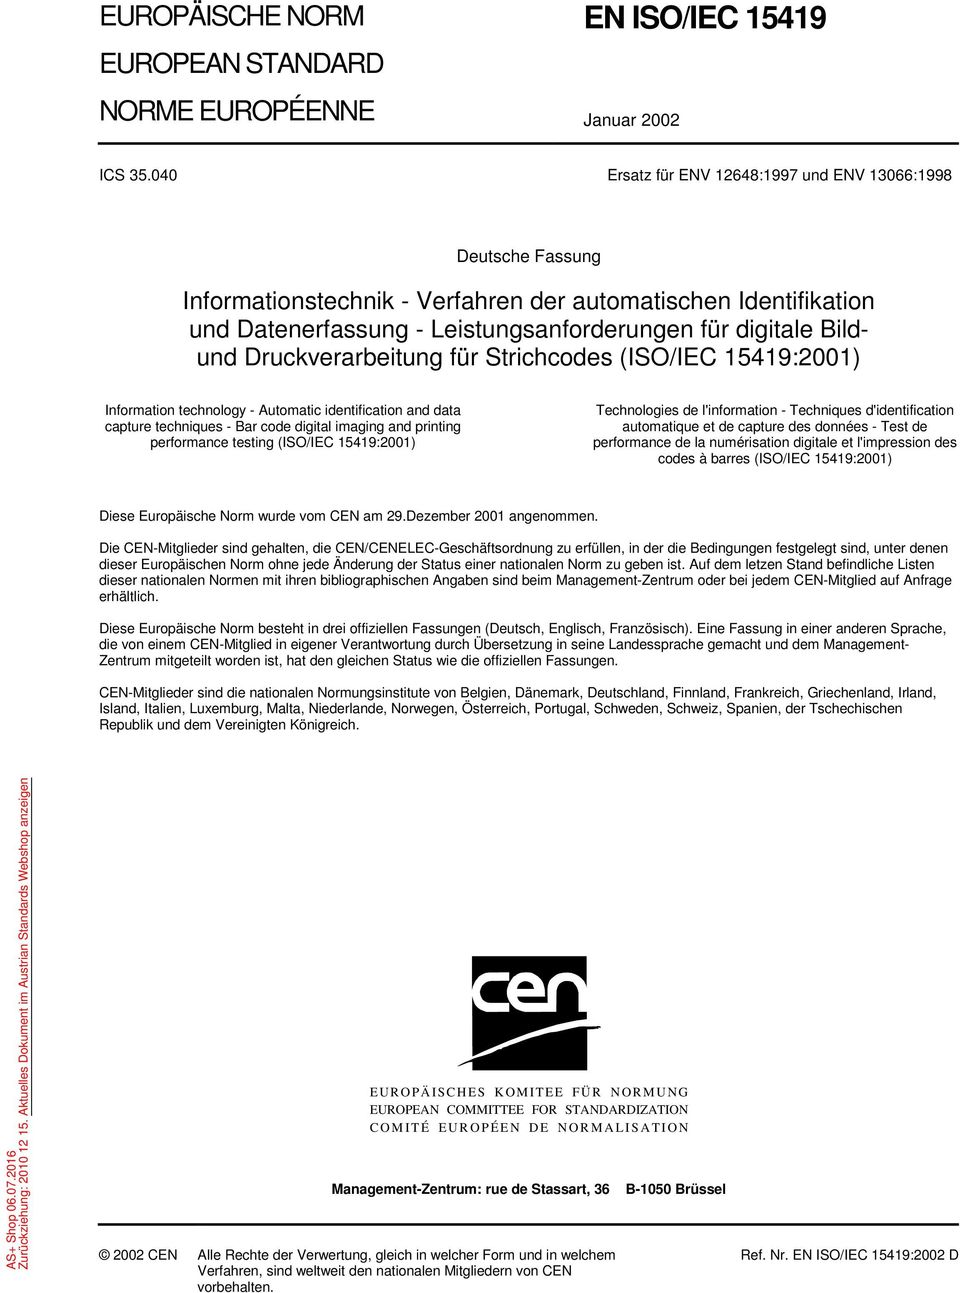 Druckverarbeitung für Strichcodes (ISO/IEC 15419:2001) Information technology - Automatic identification and data capture techniques - Bar code digital imaging and printing performance testing